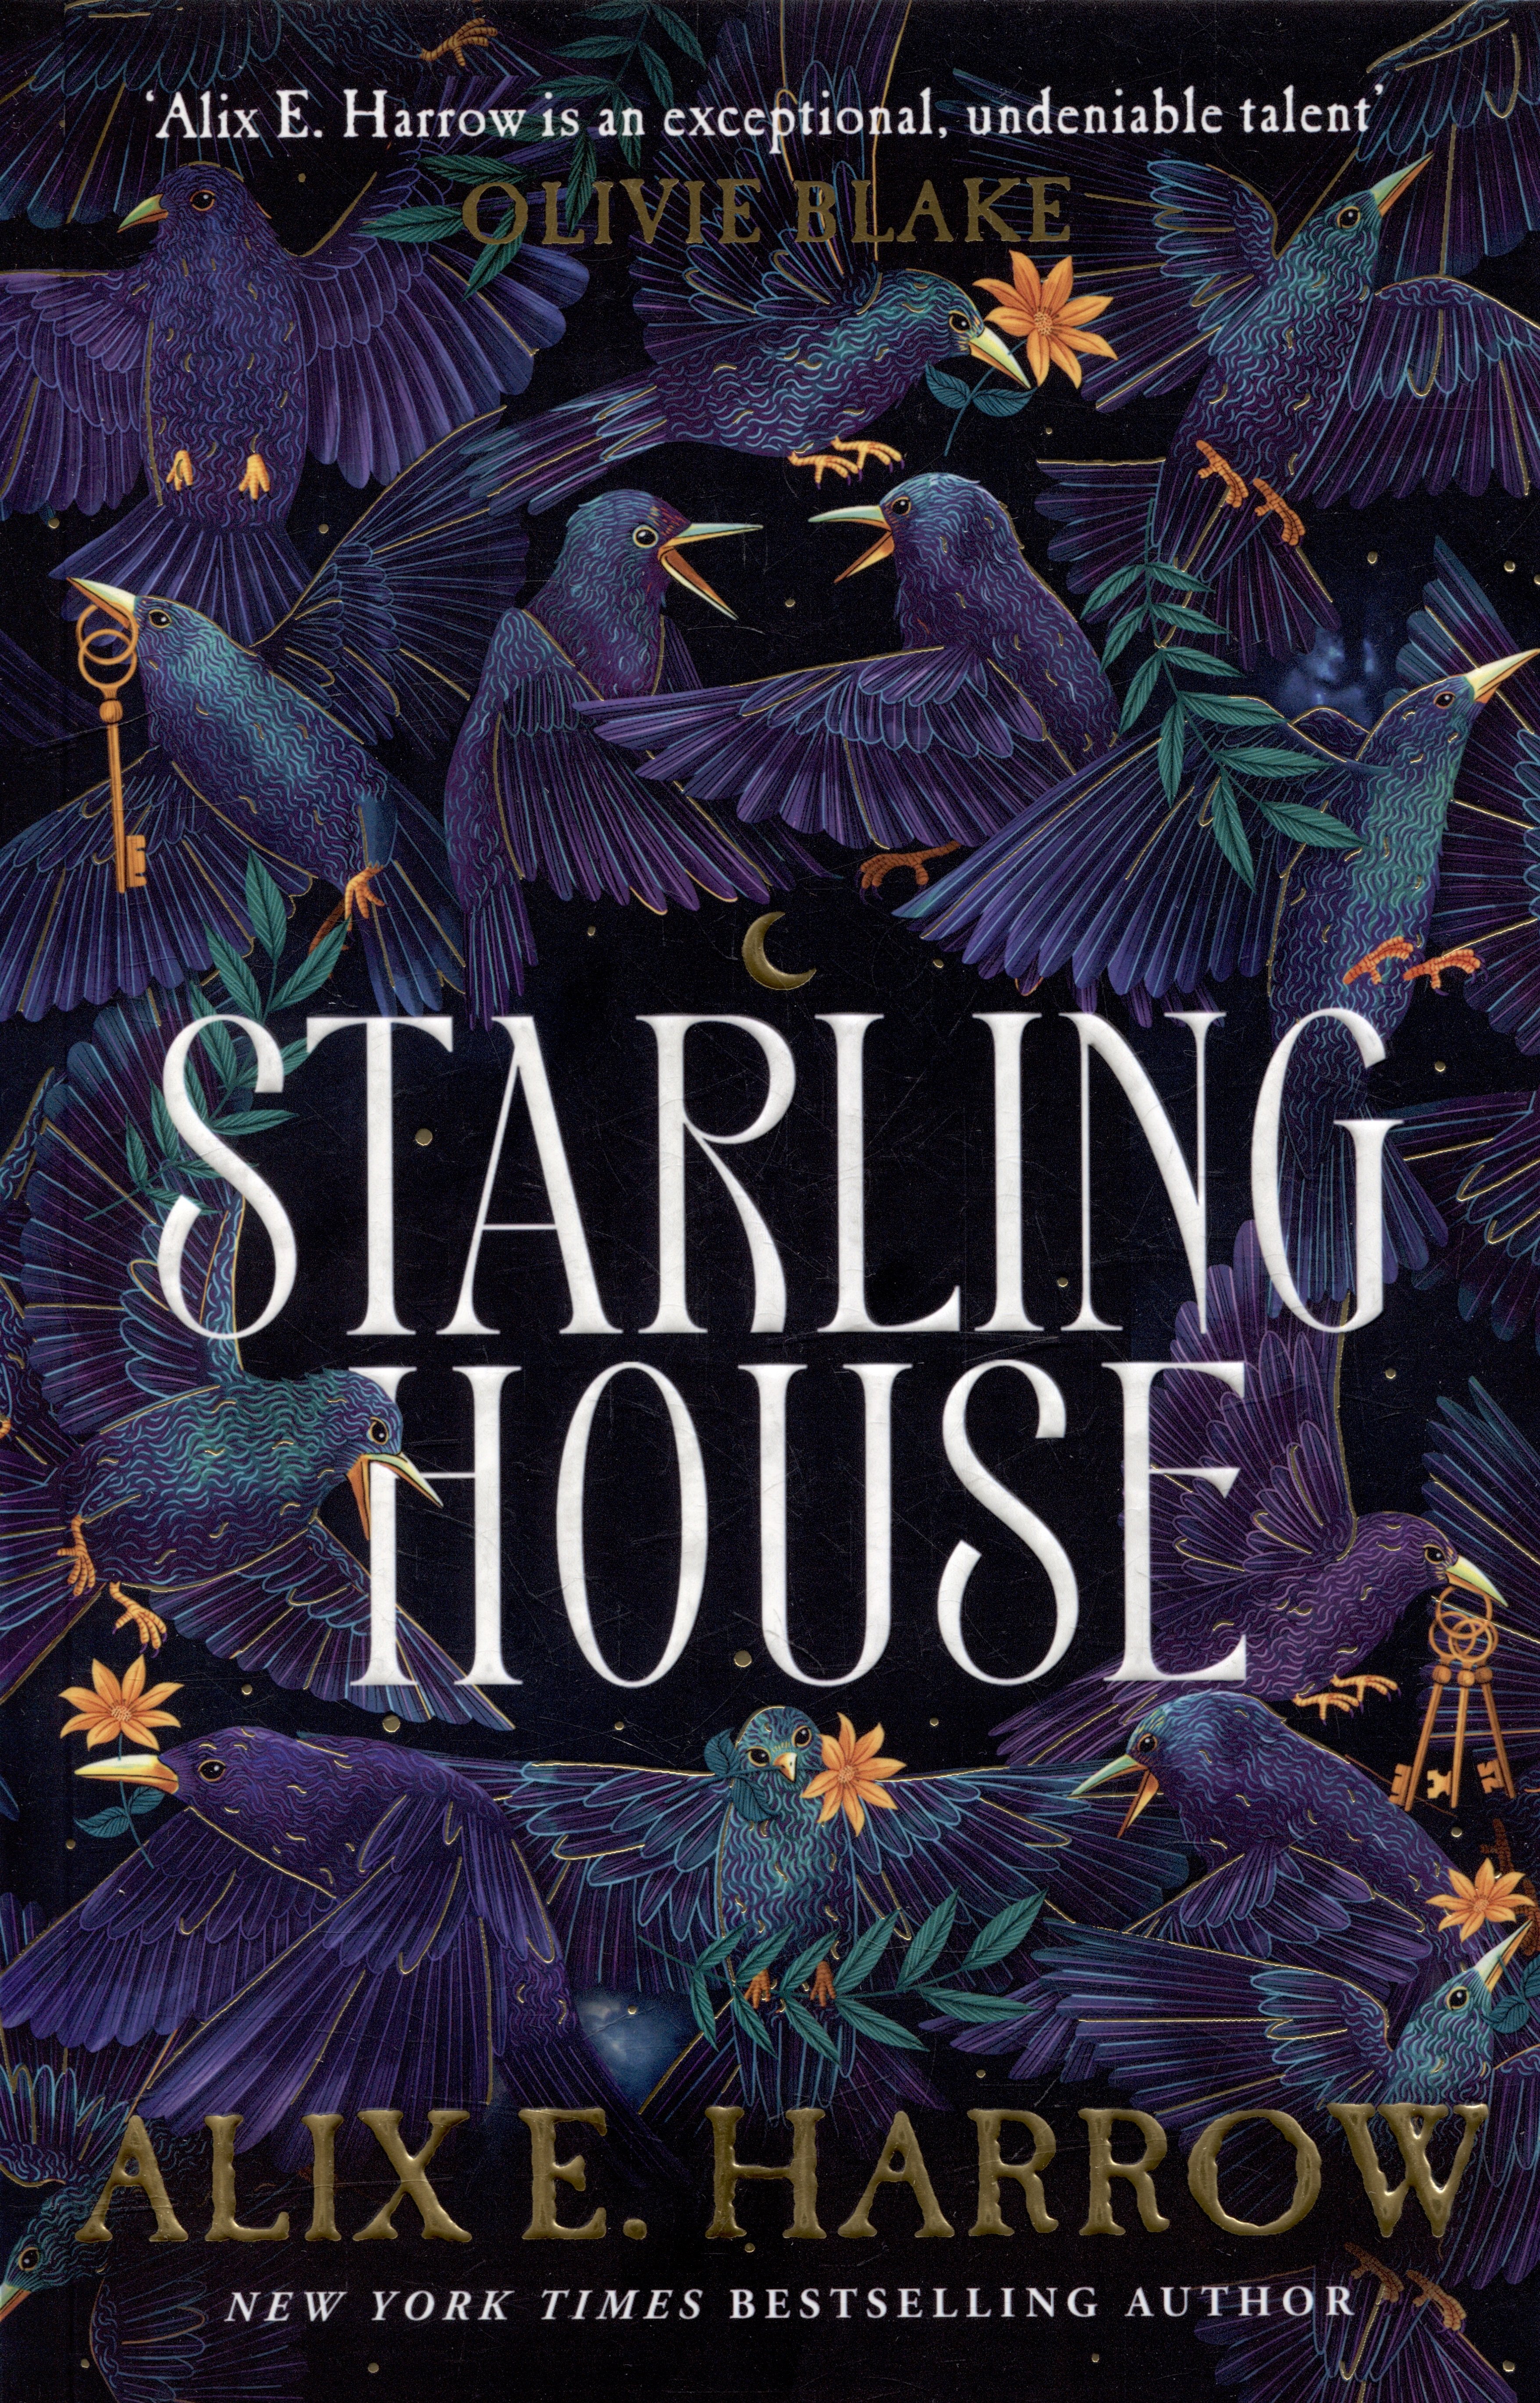 Starling house